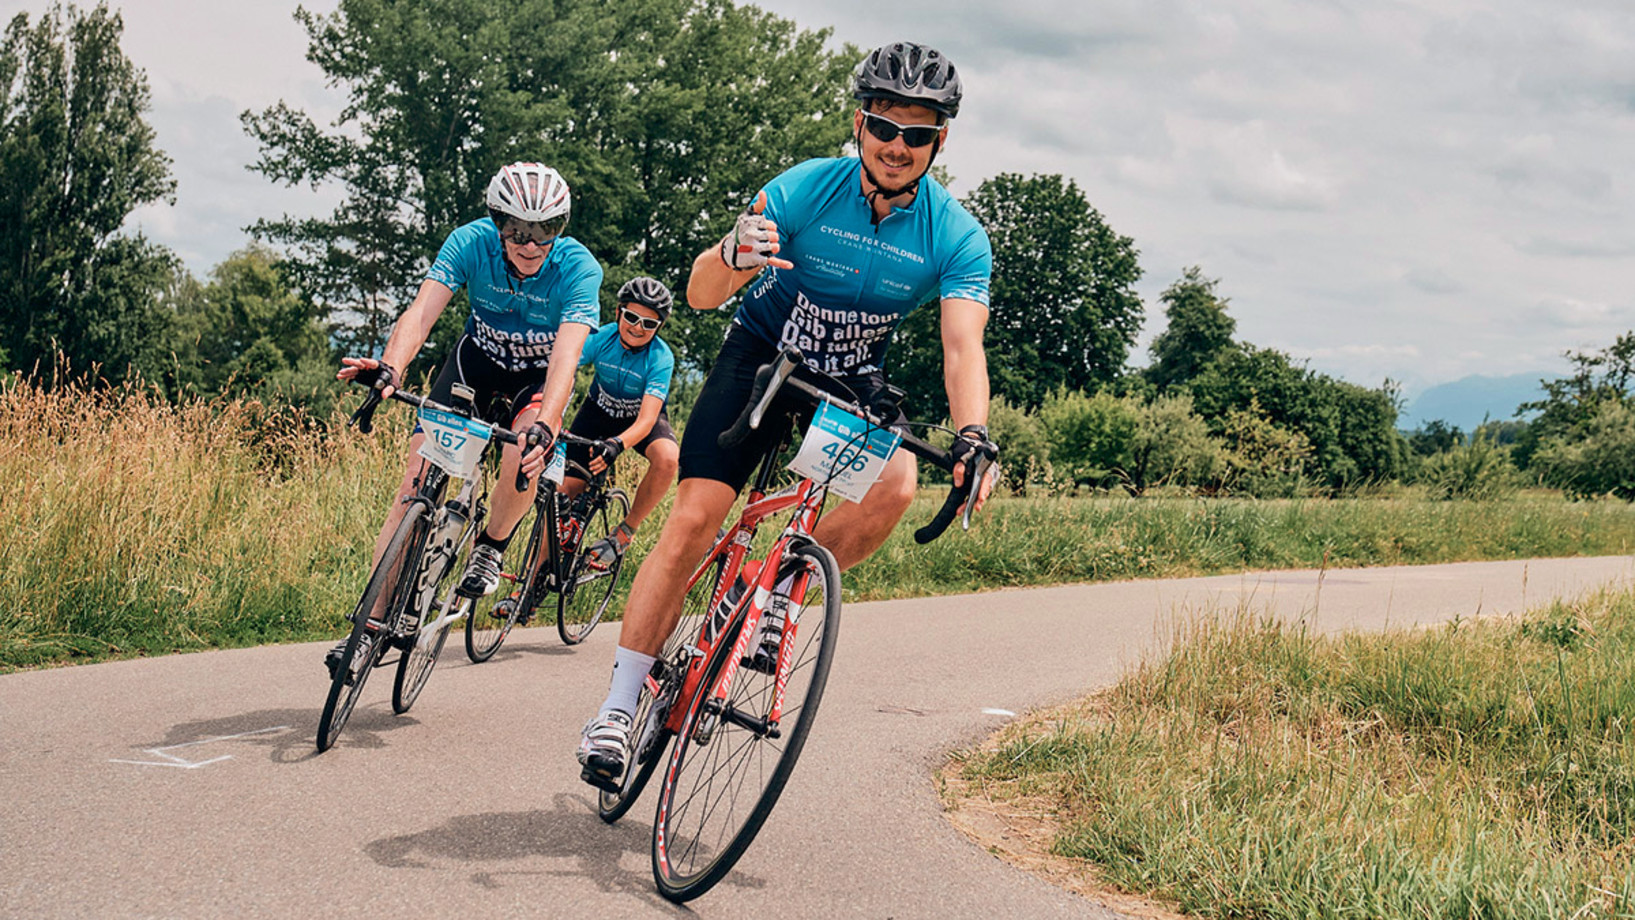 CYCLING FOR CHILDREN 2019